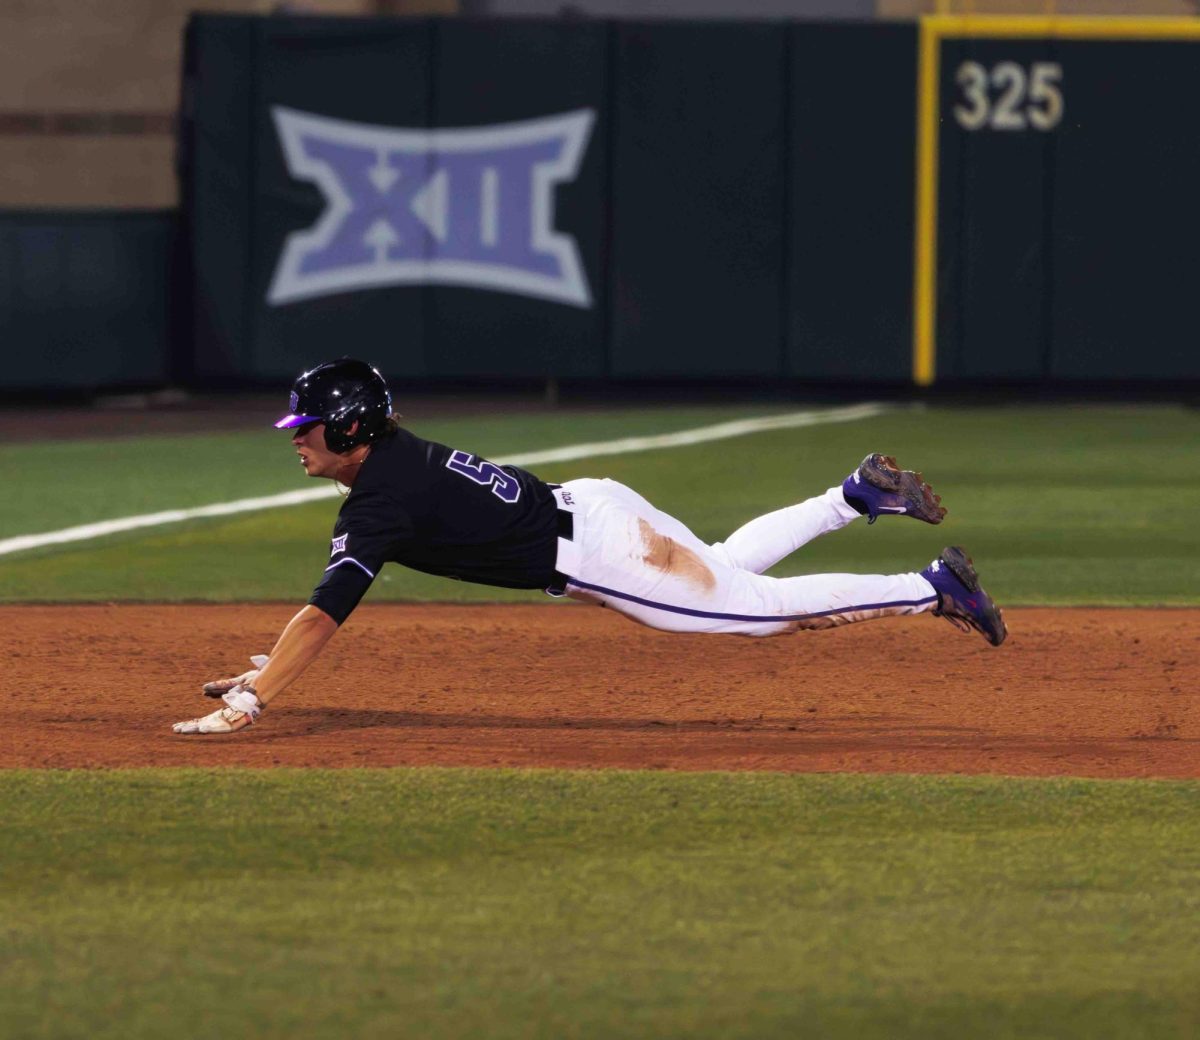 TCU shortstop Anthony Silva dives headfirst into third base at Lupton Stadium in Fort Worth, Texas on Feb. 27, 2024. The TCU Horned Frogs beat the Washington State Cougars 8-7 in 12 innings. (TCU360/Tyler Chan)